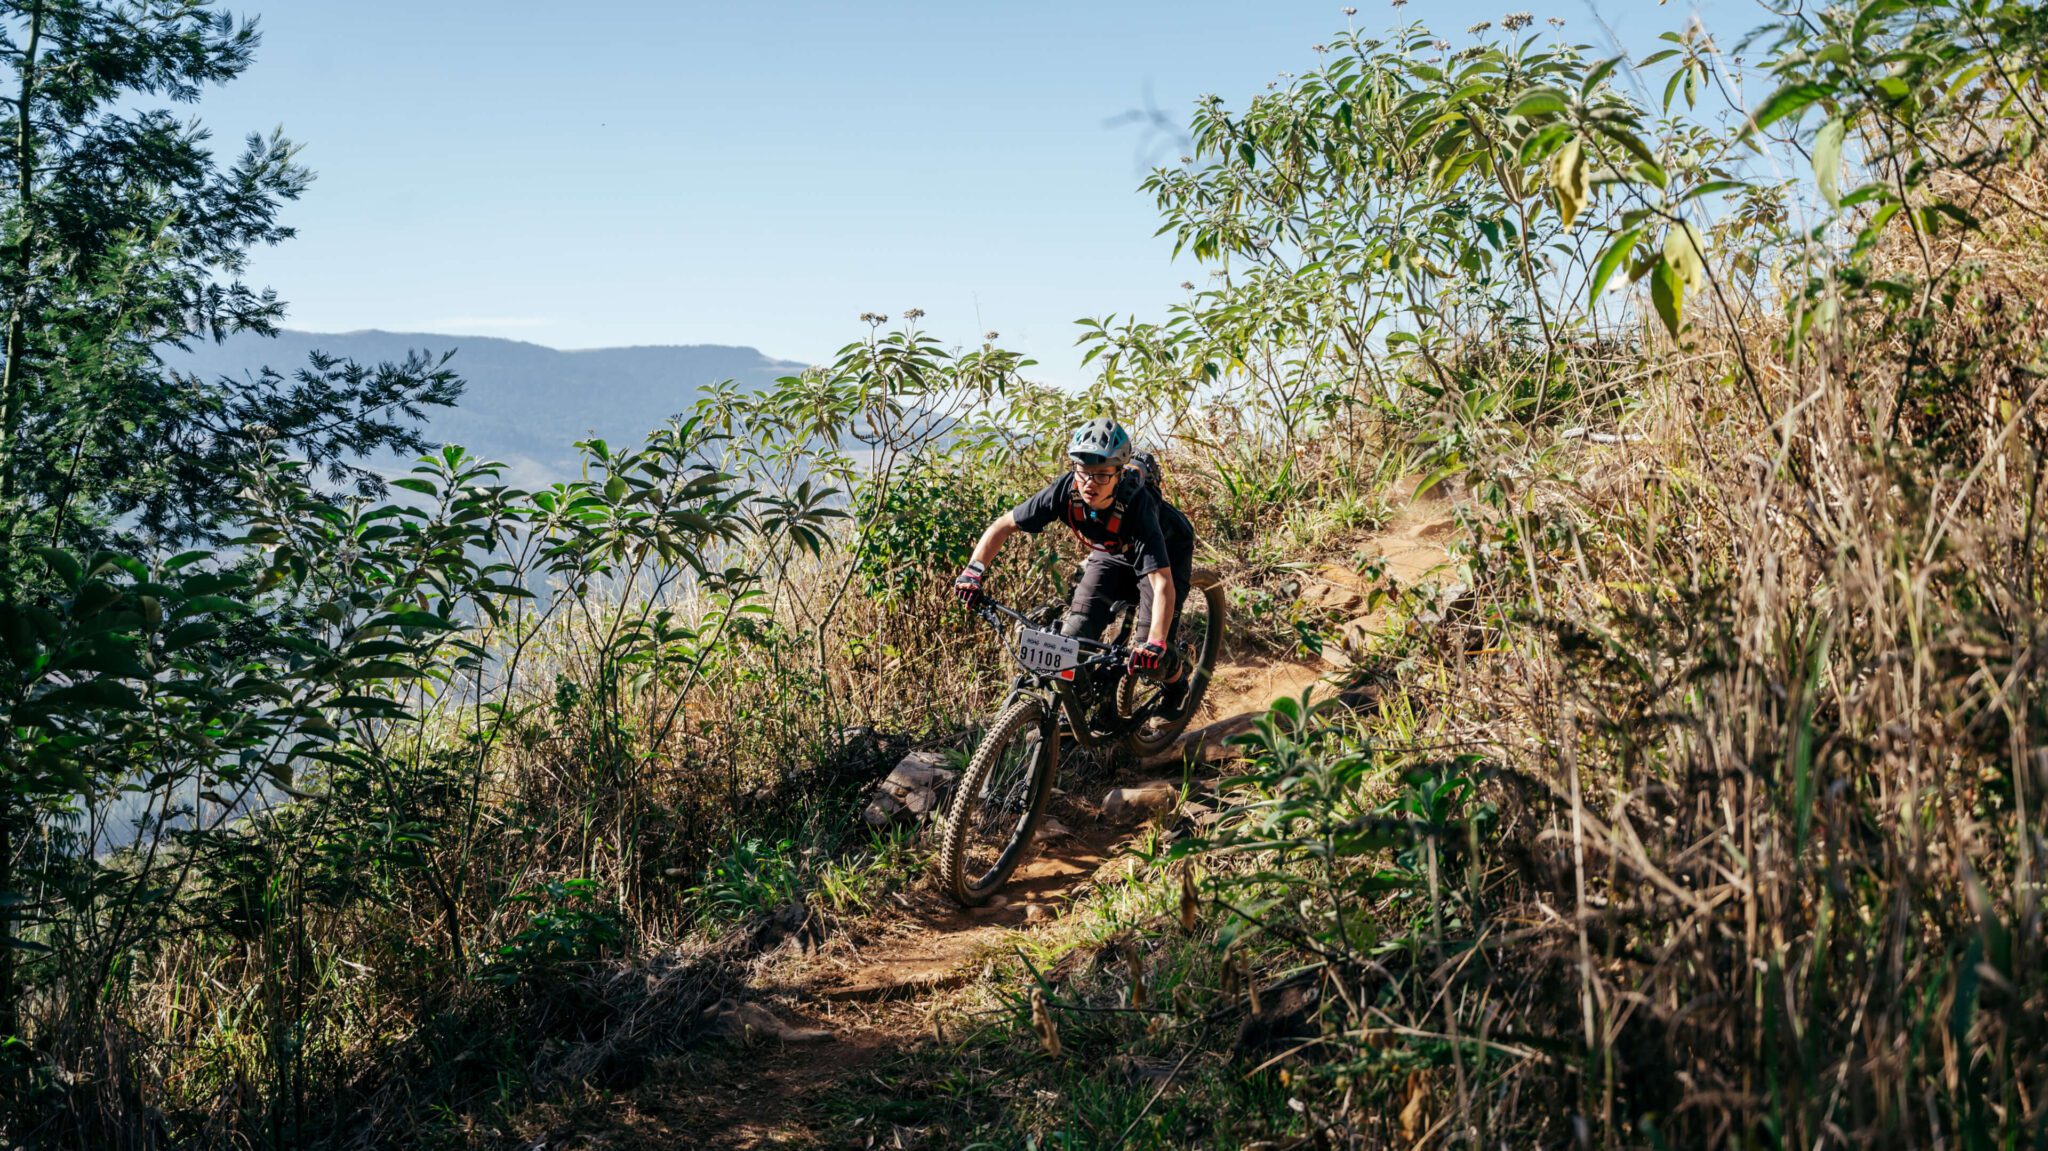 Who Are The Top Contenders For The 2023 2 Day Karkloof Enduro?